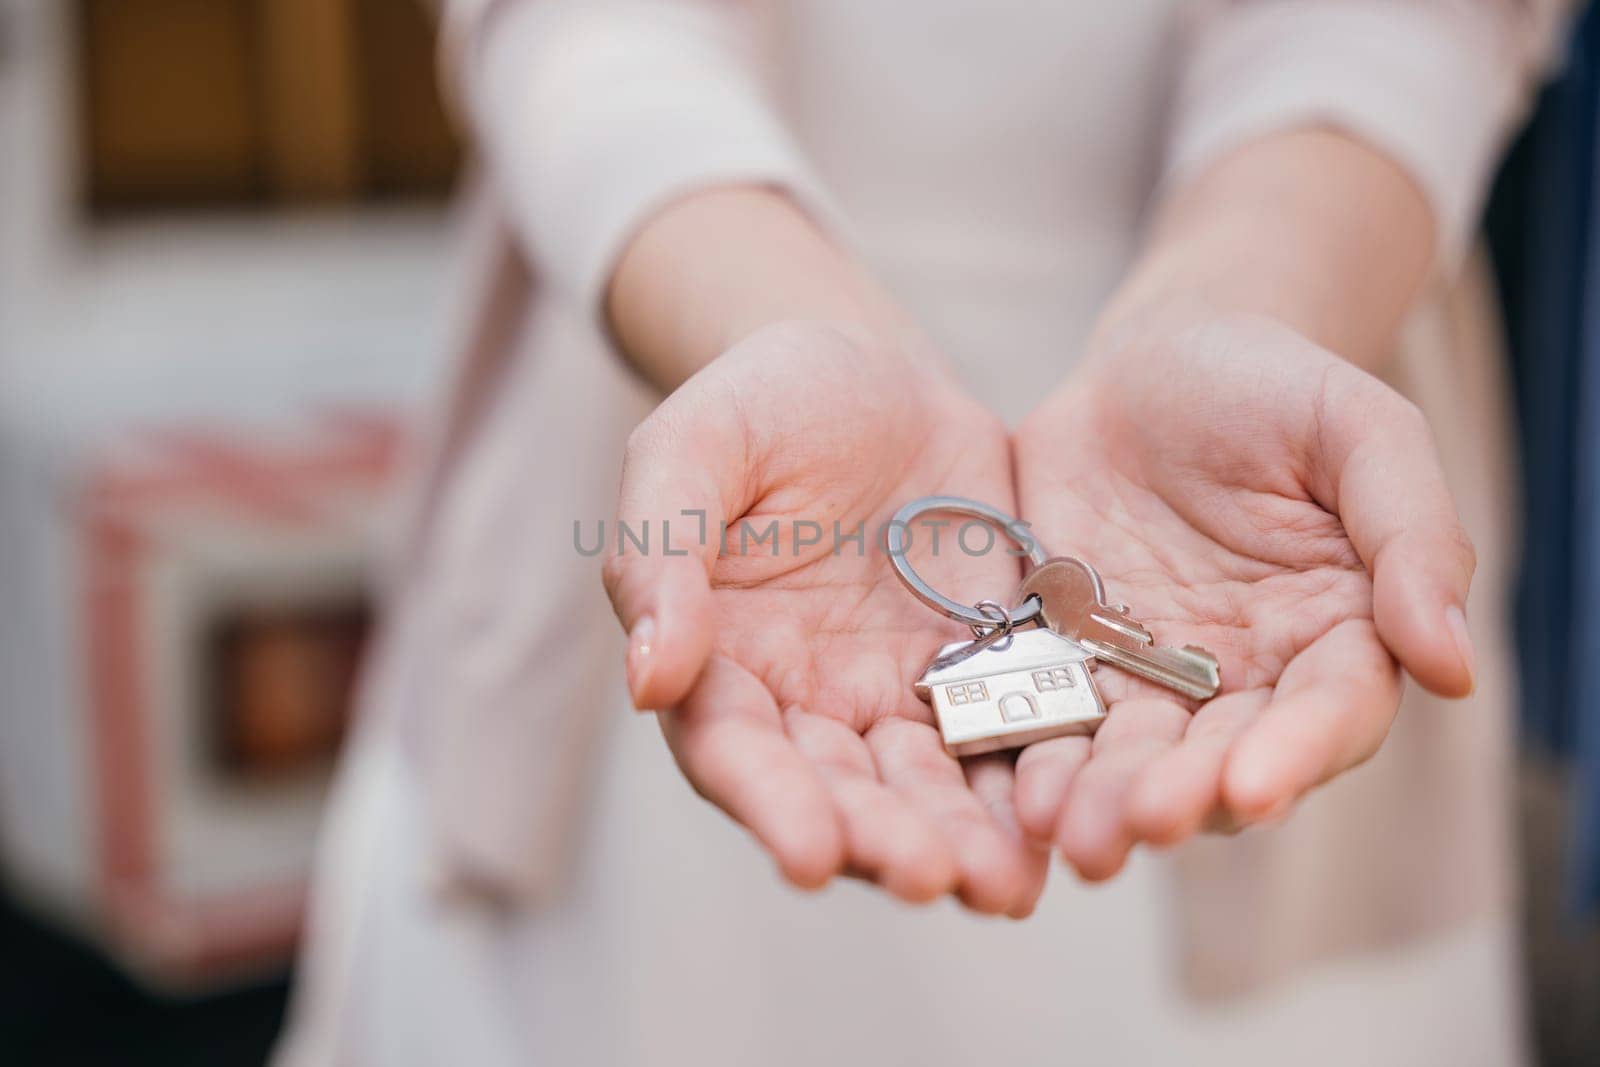 Happy woman landlord handing over keys signifying property deal success and tenant security. Real estate concept portrays new beginnings and investment achievement. Give me the key by Sorapop